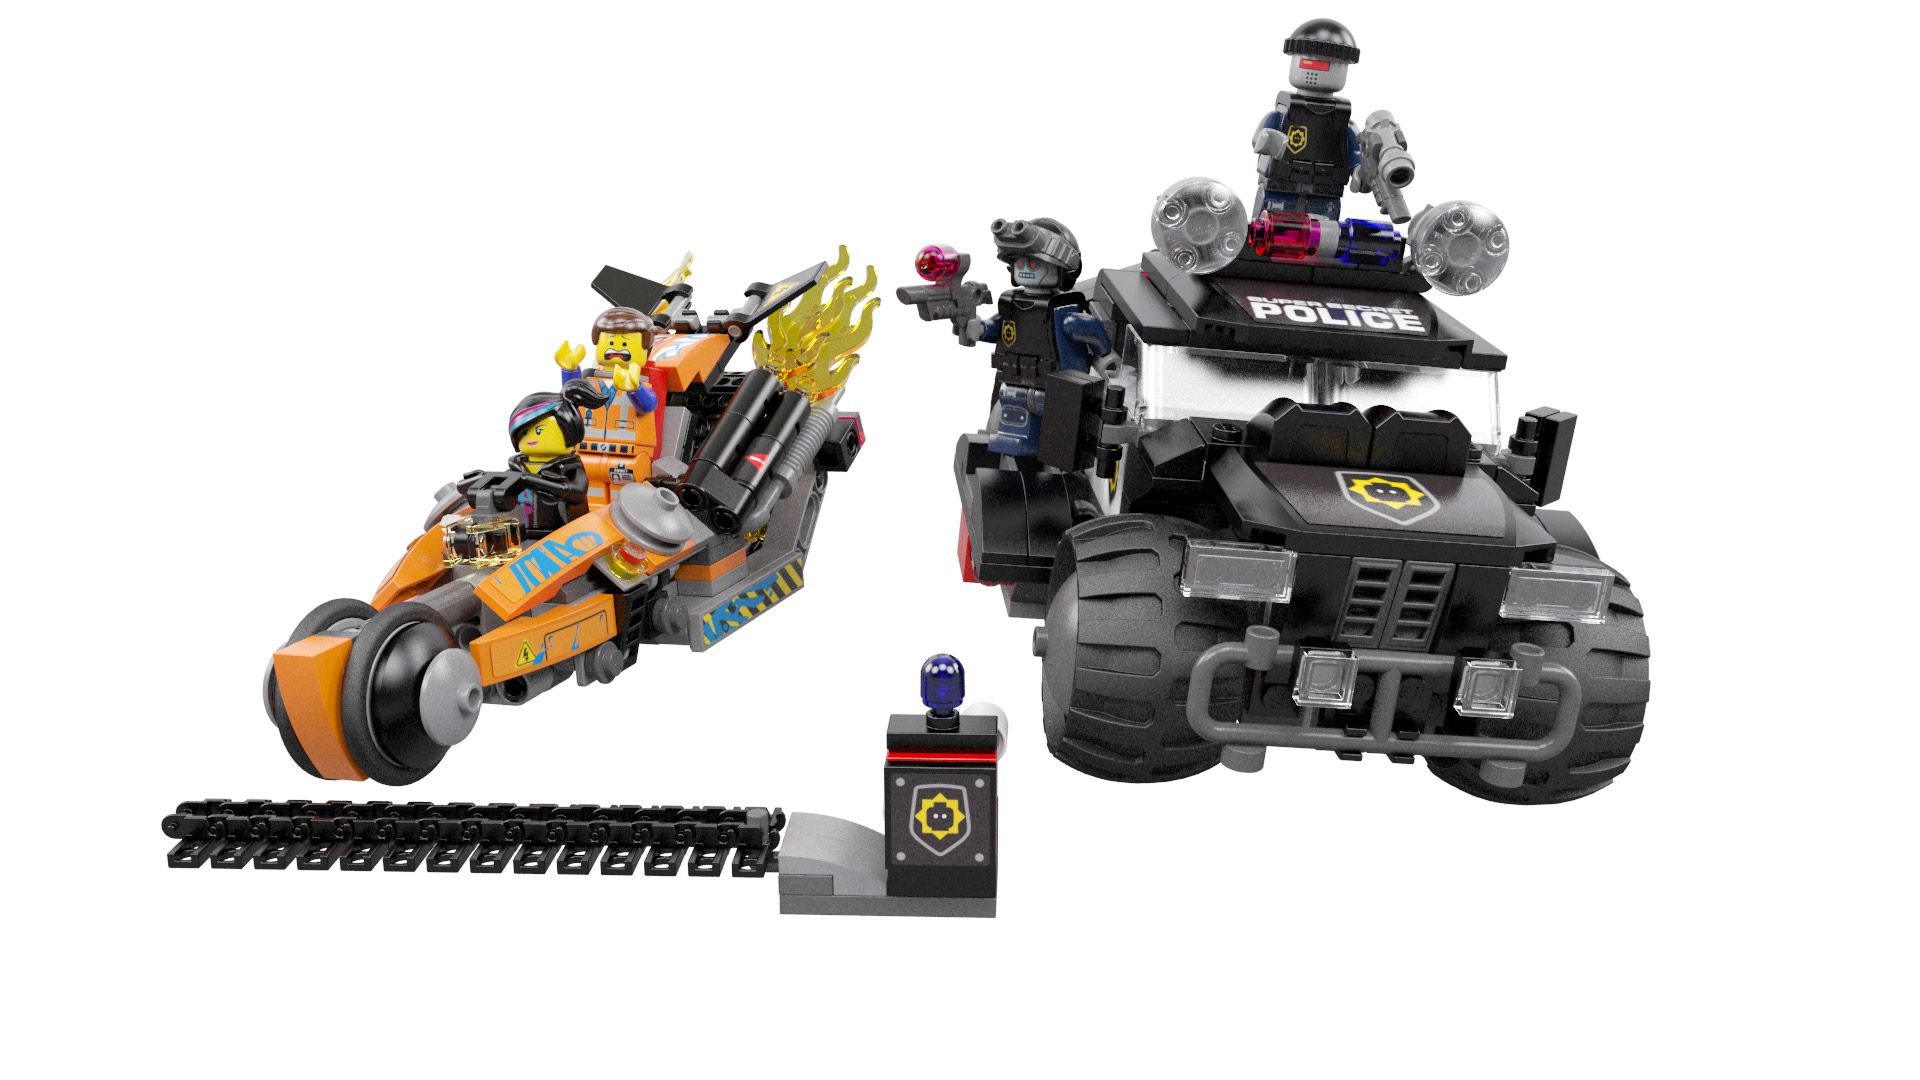 Lego the Movie Building Sets